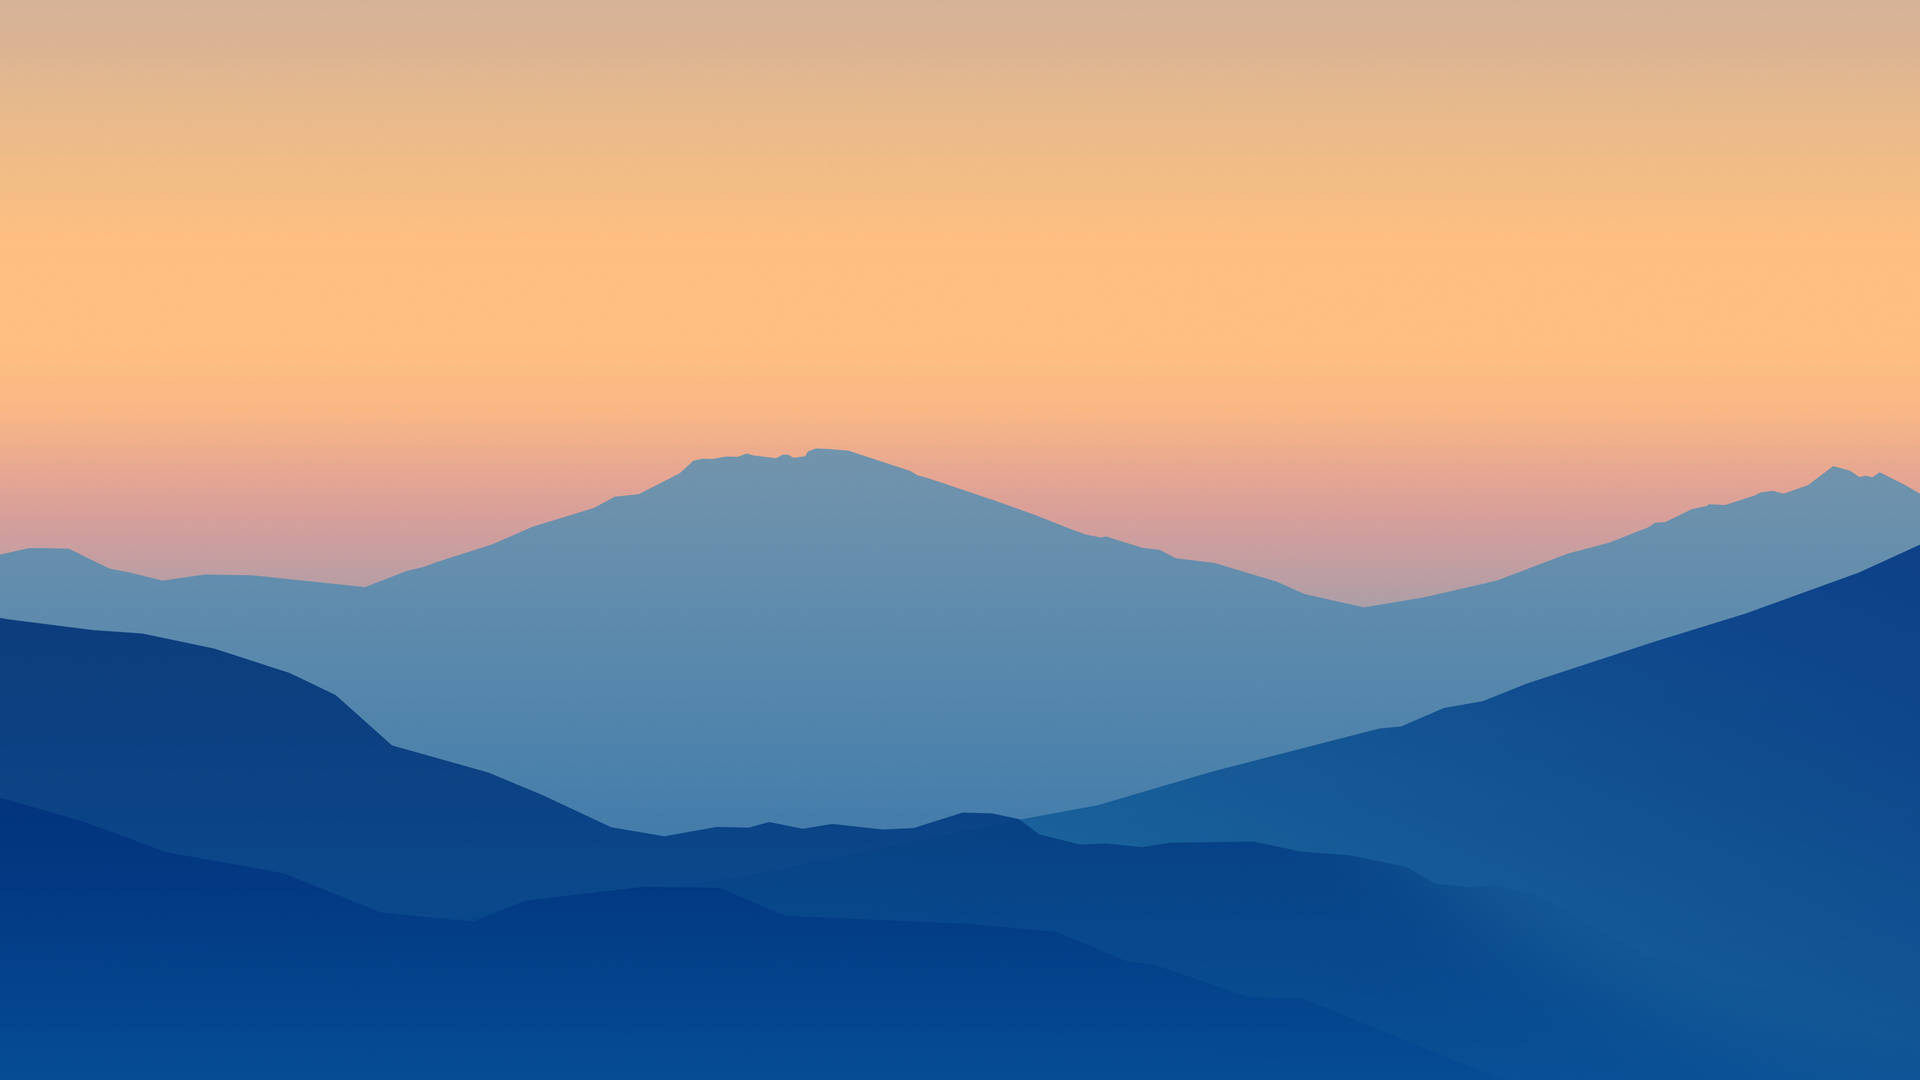 Nature's Beauty - A Colorful Minimalist Vector Art Mountain Background